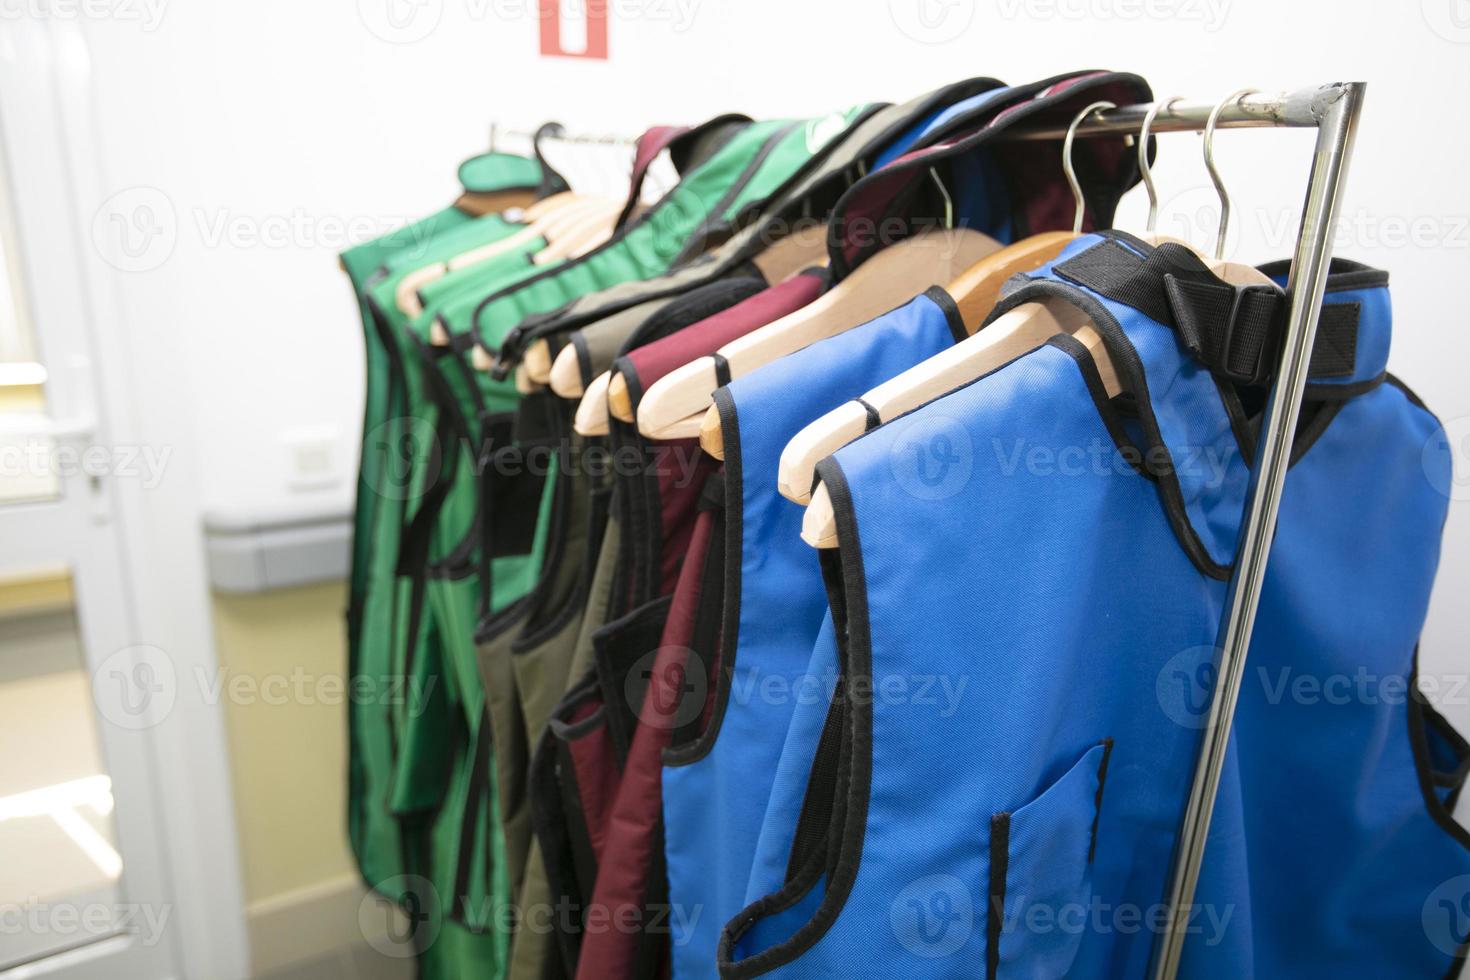 Rack of lead aprons used for x-ray protection in operating room, hospital photo